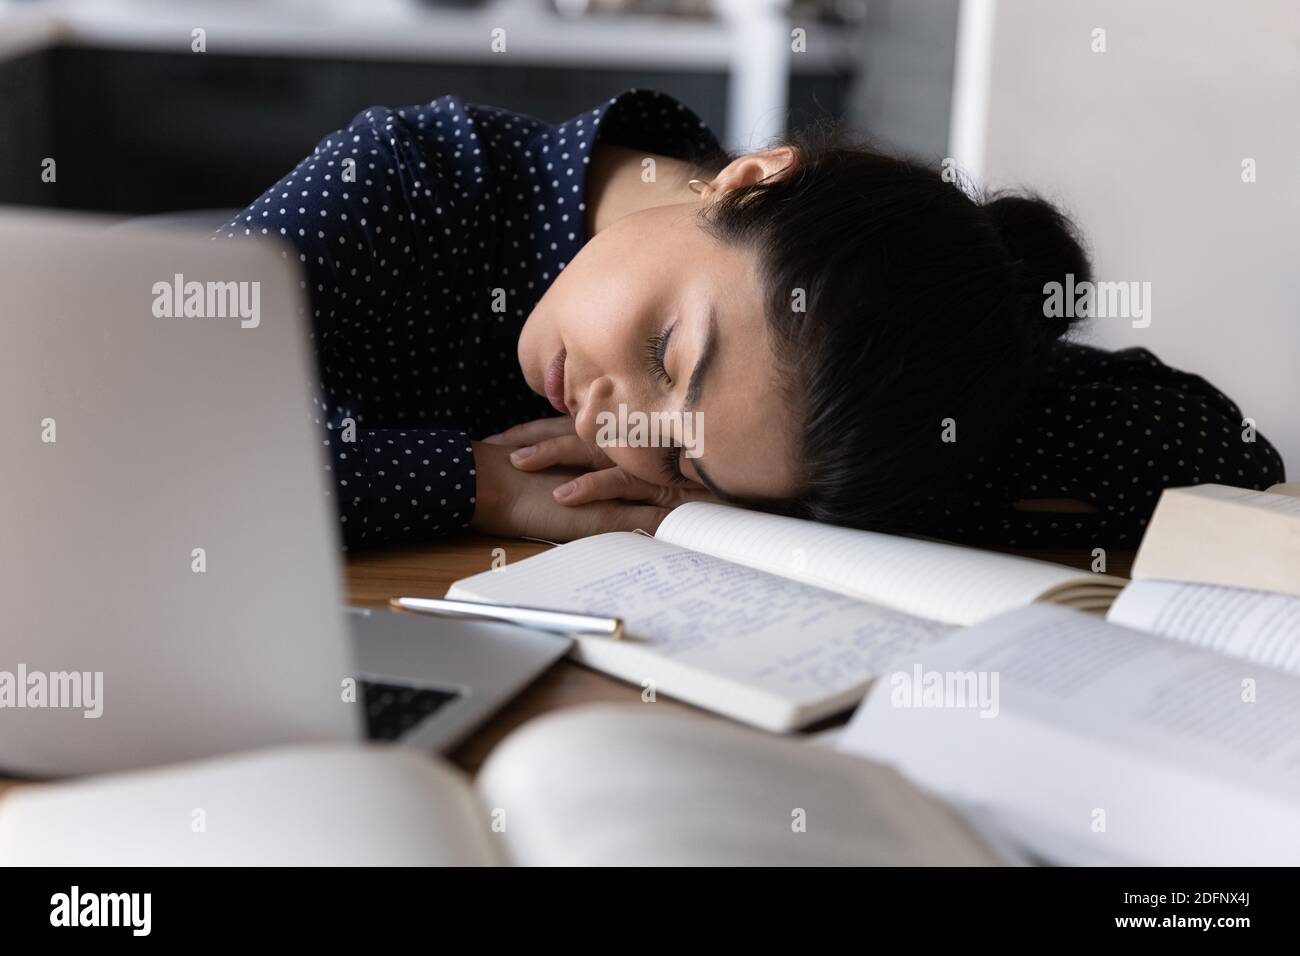 Fatigued young mixed race woman sleeping at workplace among books Stock Photo